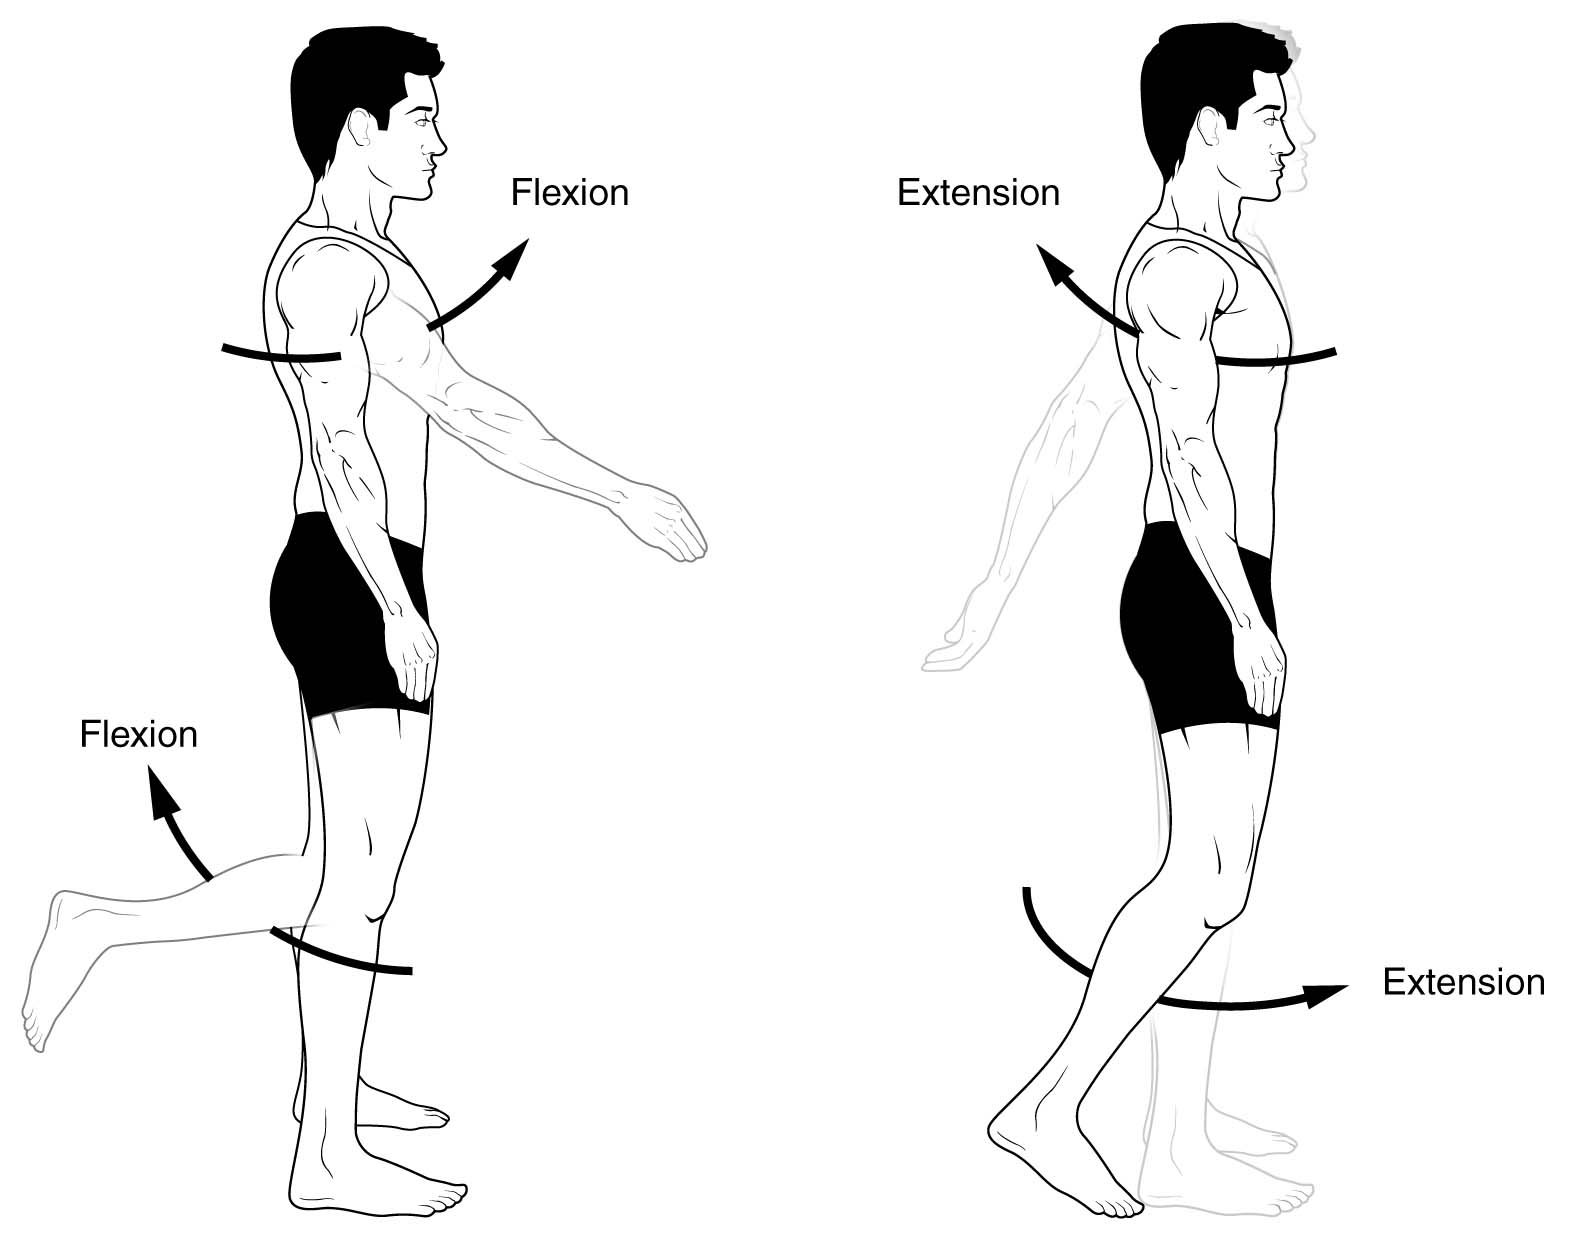 What is the difference between flexion and extension? - Samarpan Physio